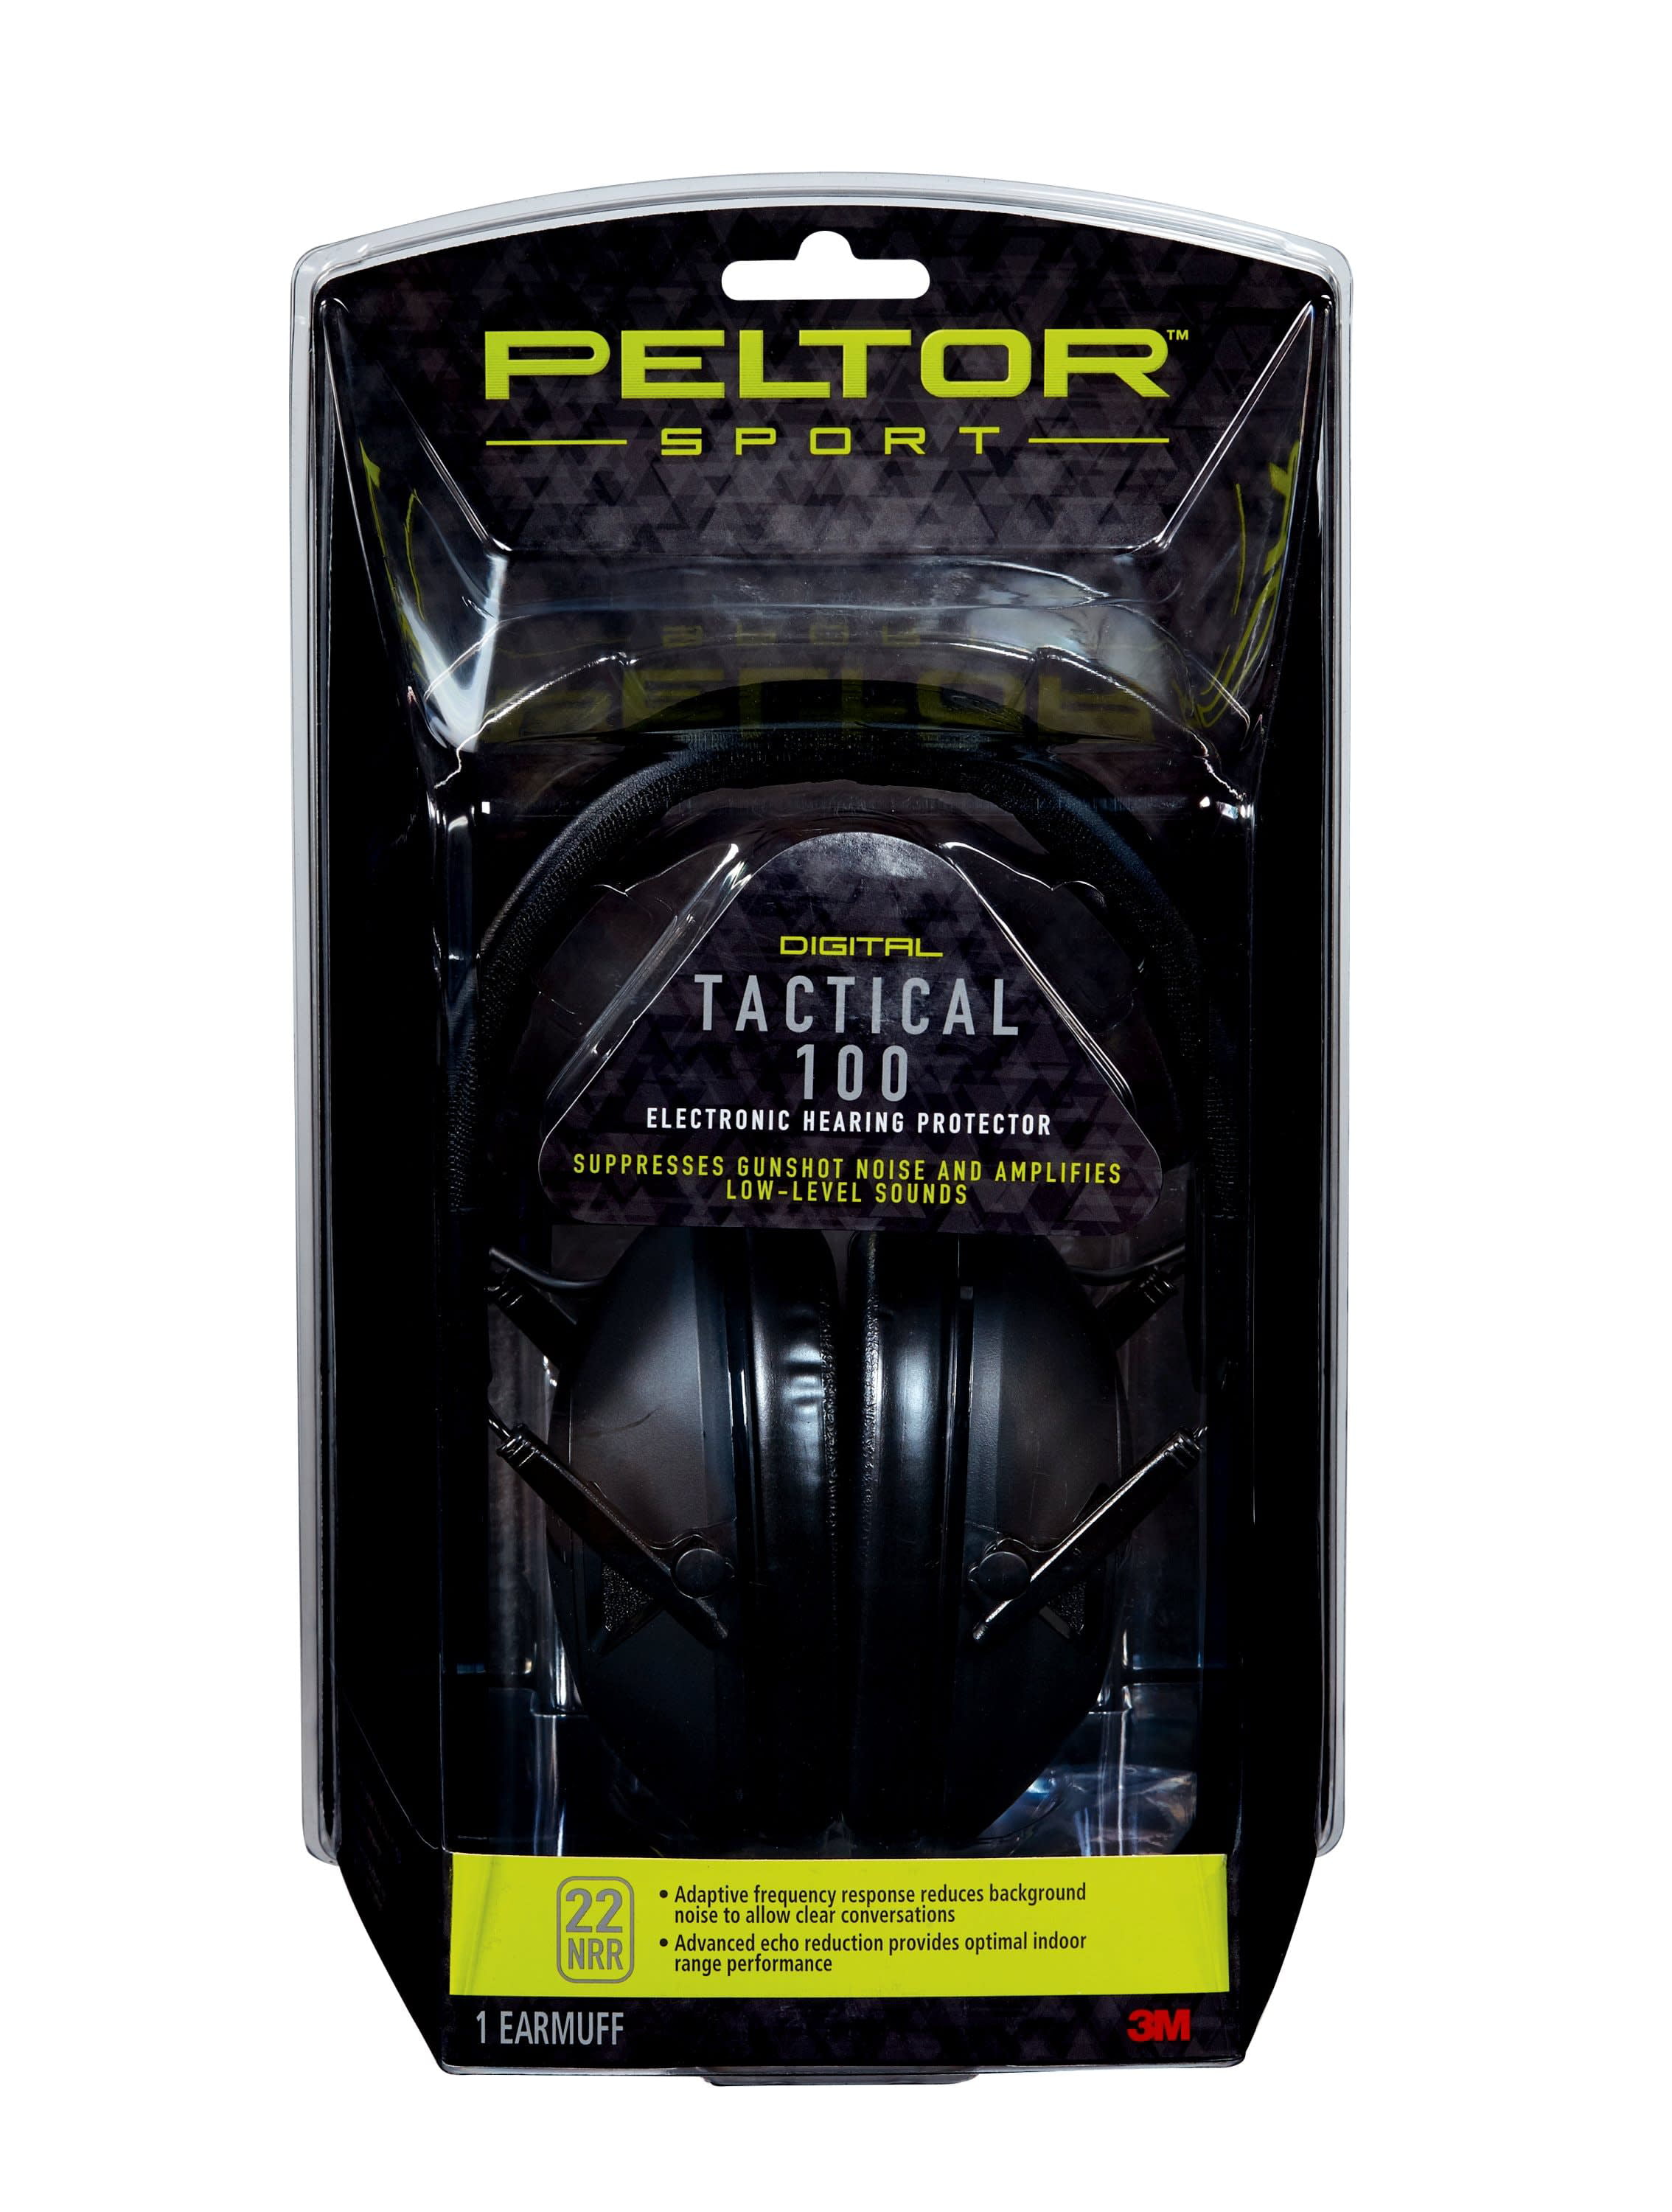 Nrr 22 D Details about   Peltor Sport Tactical 100 Electronic Hearing Protector Ear Protection 